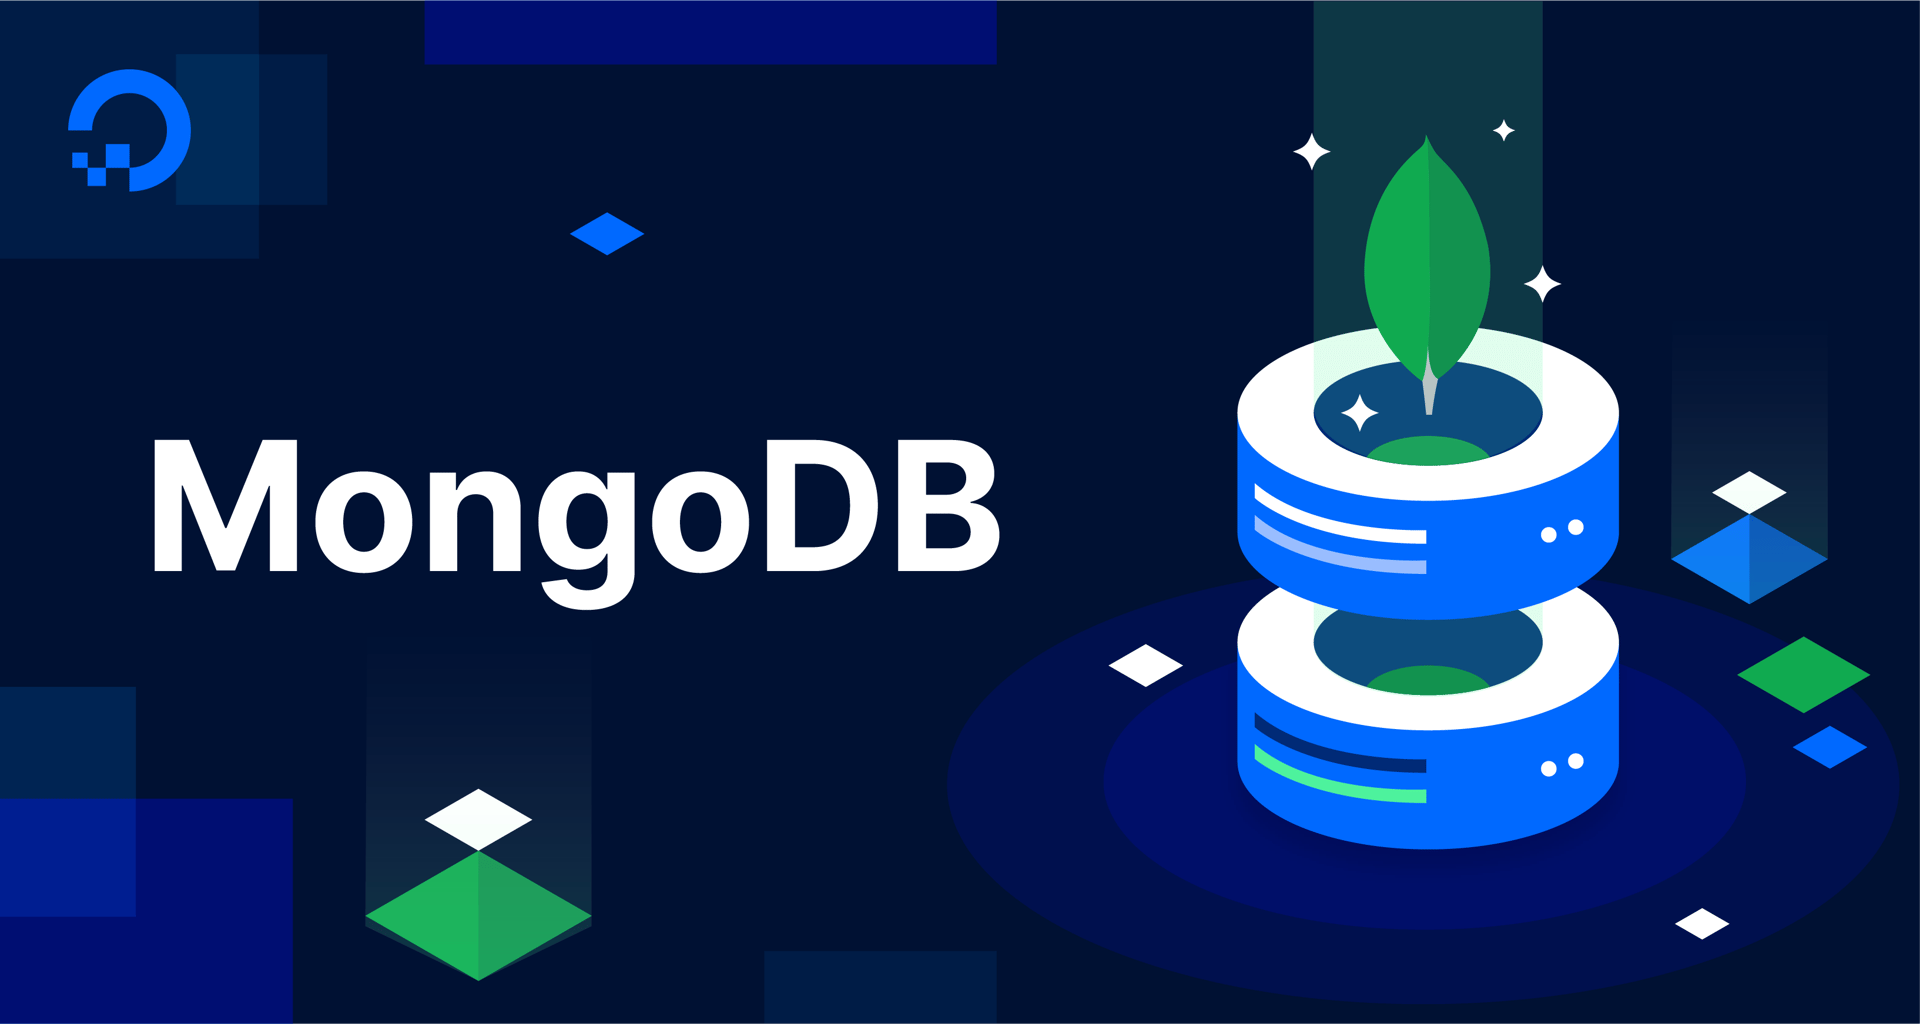 Managed and Self-Managed MongoDB Hosting - Which to choose and why?